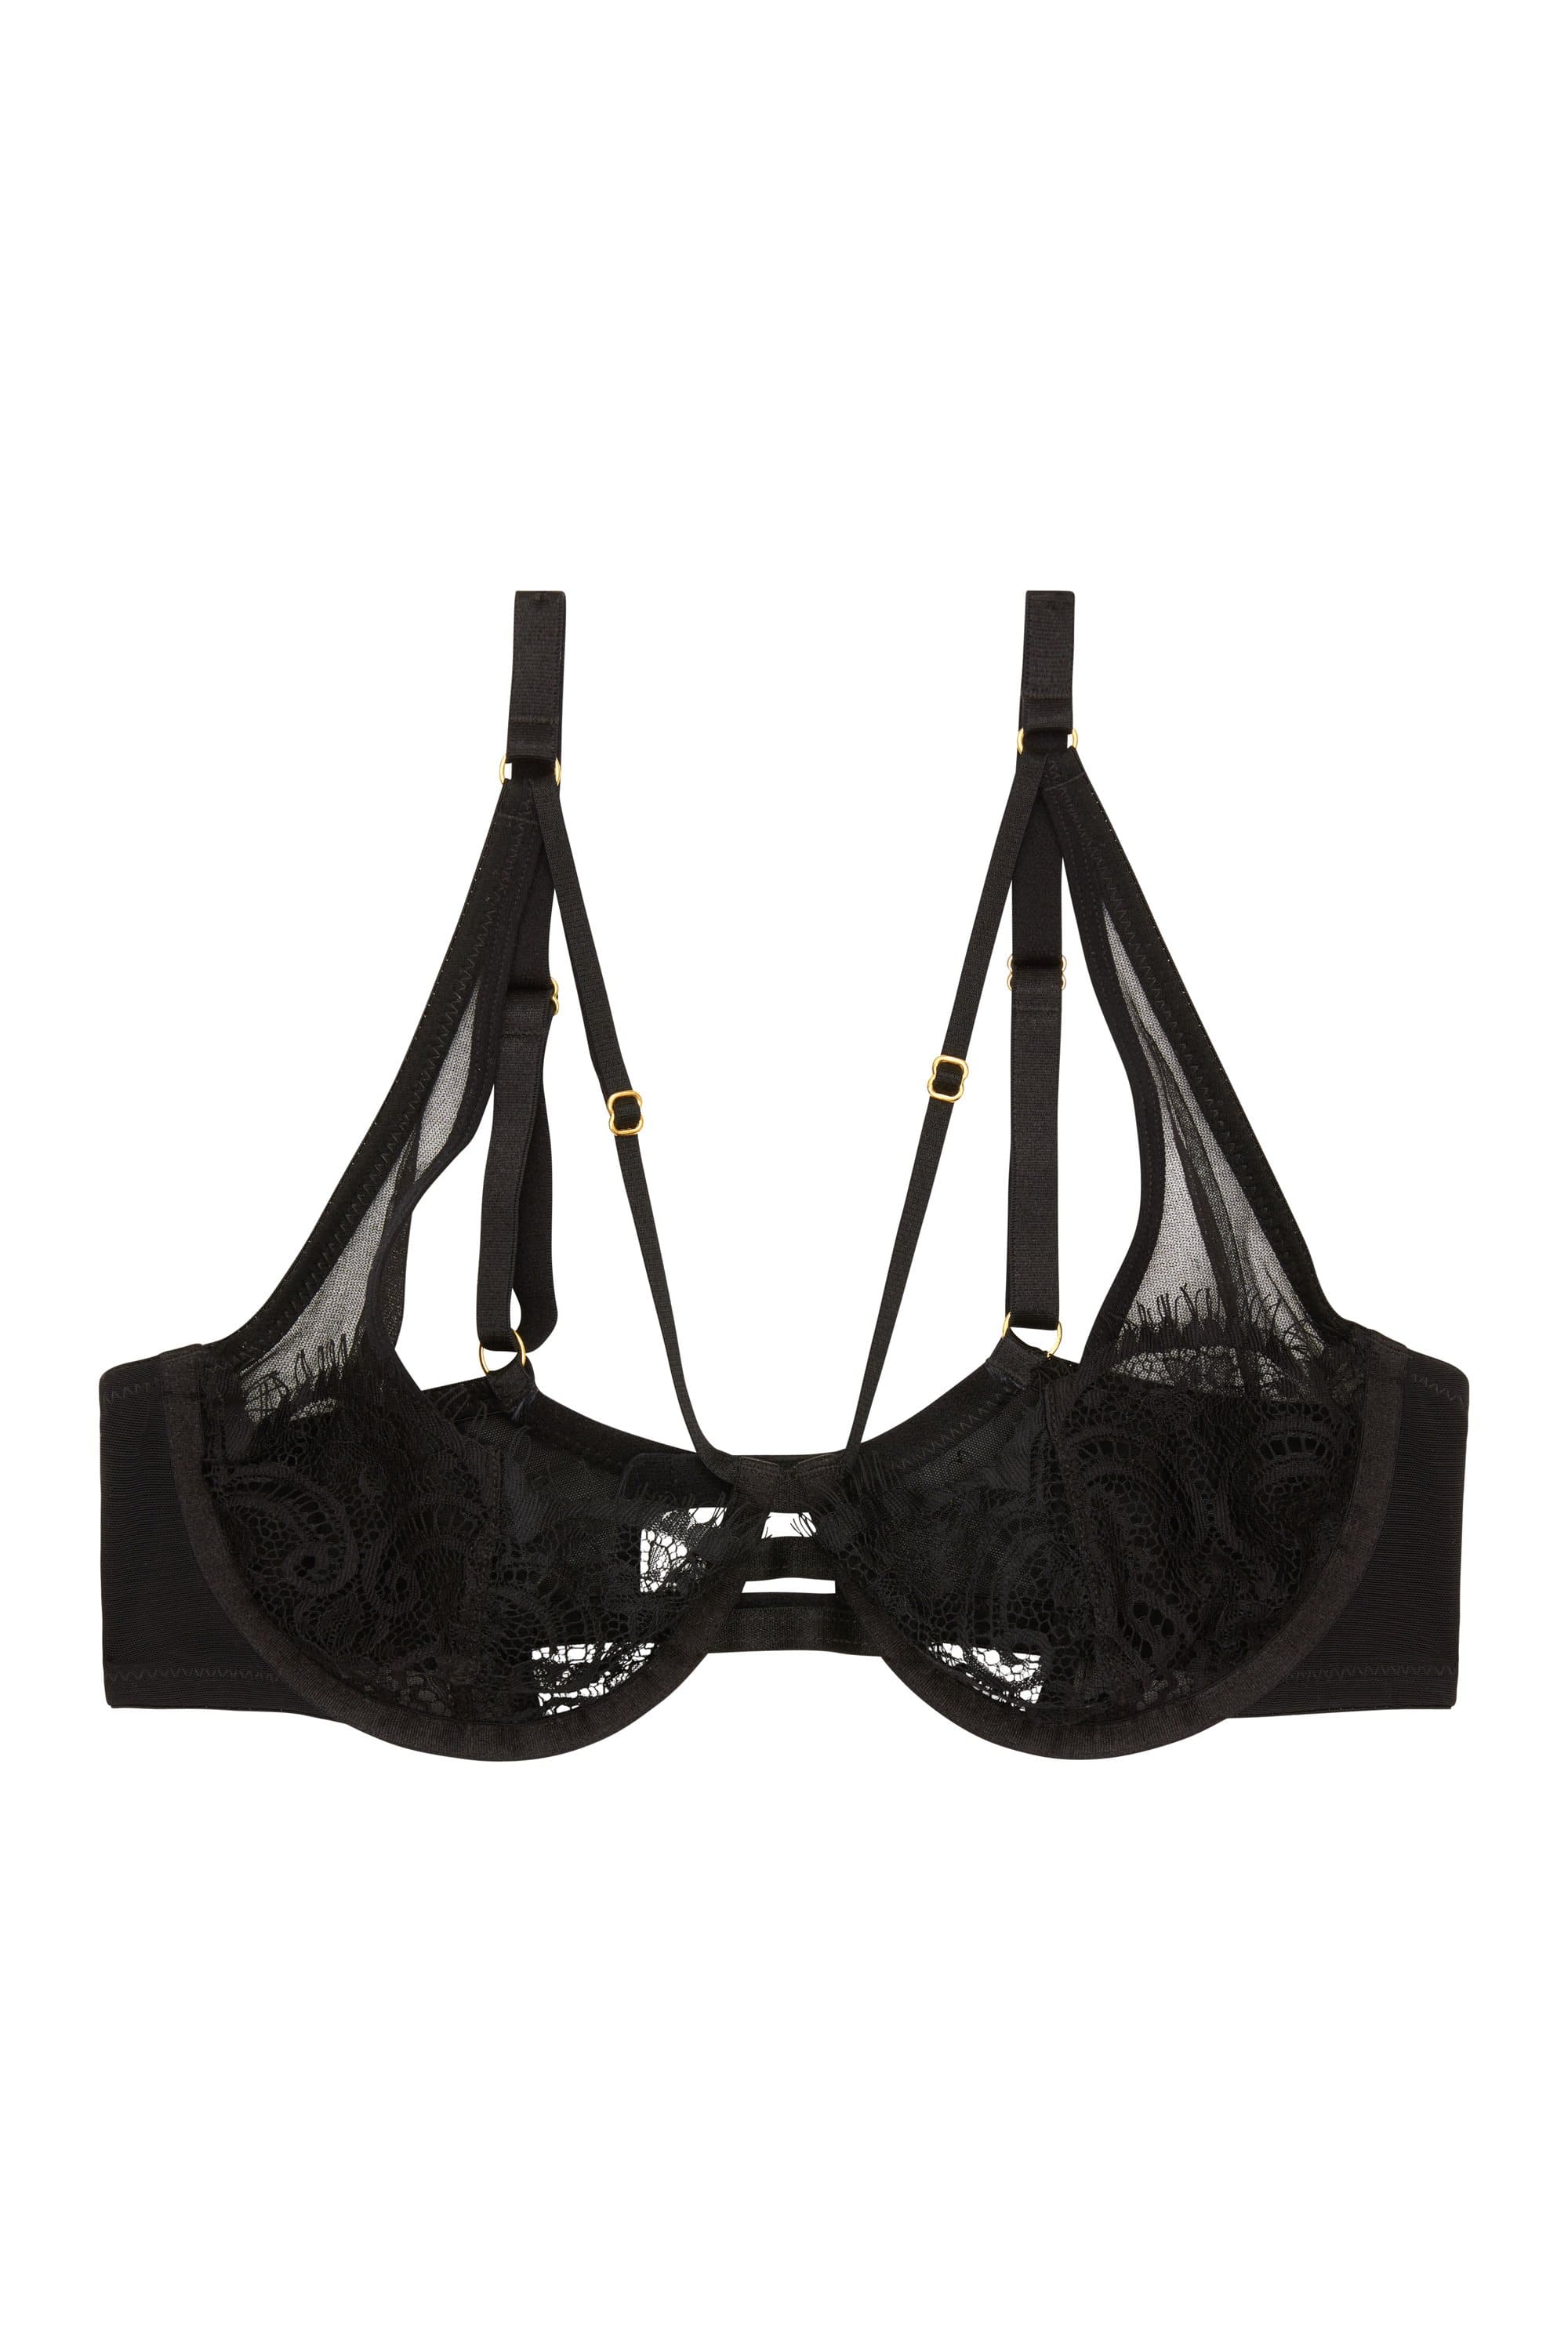 Wolf & Whistle Layla Lace Overlay High Apex Bra